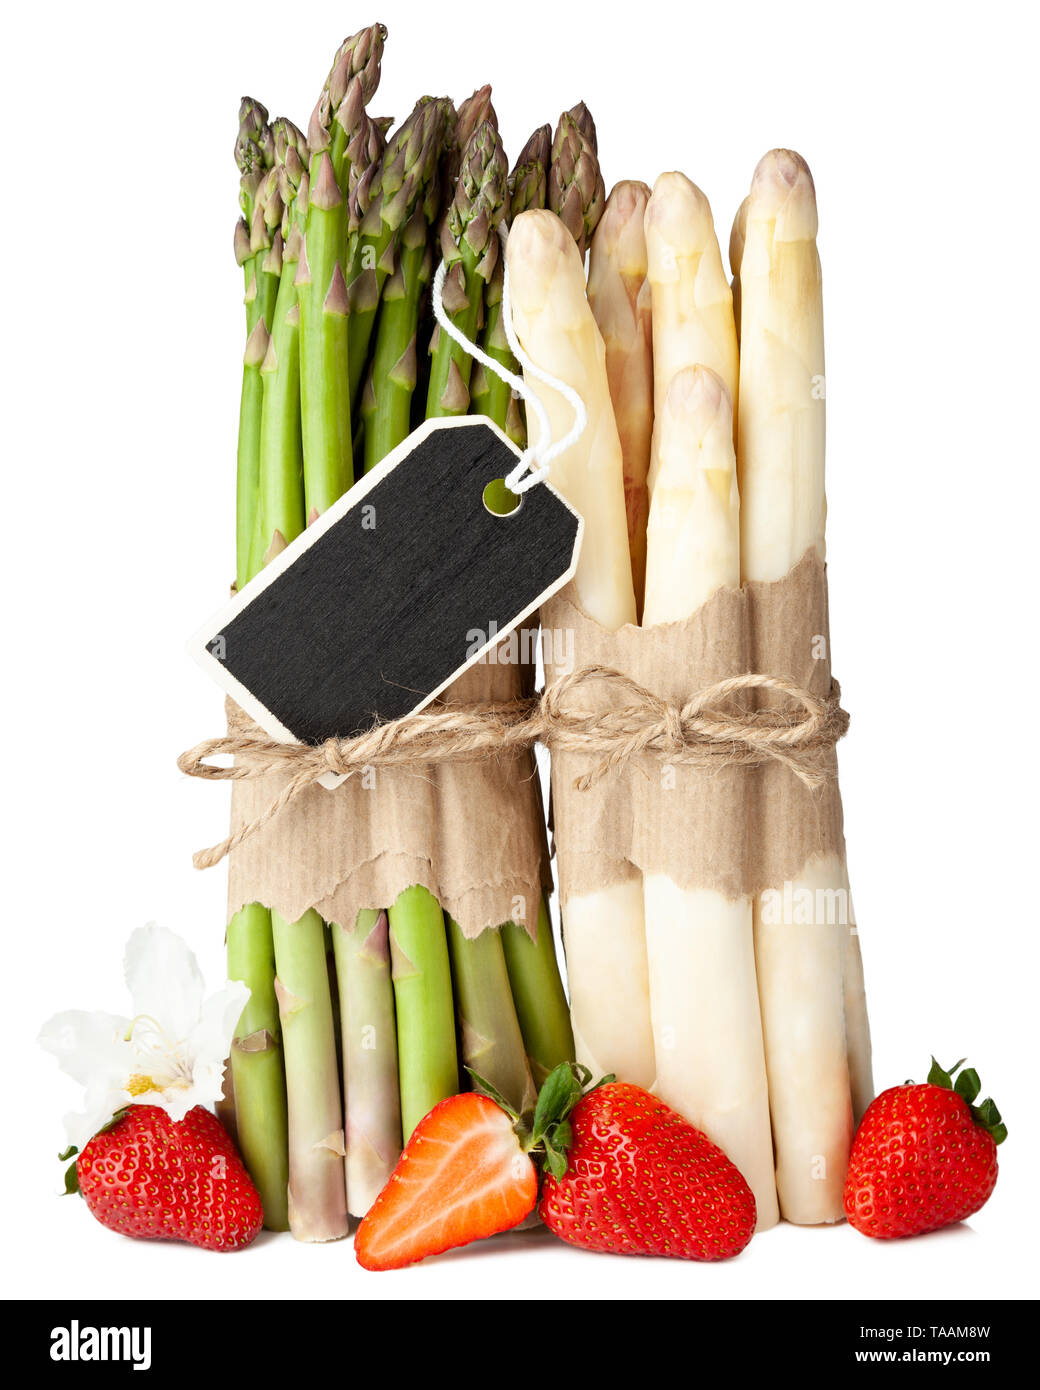 Fresh green and white asparagus with strawberries on isolated white background Stock Photo